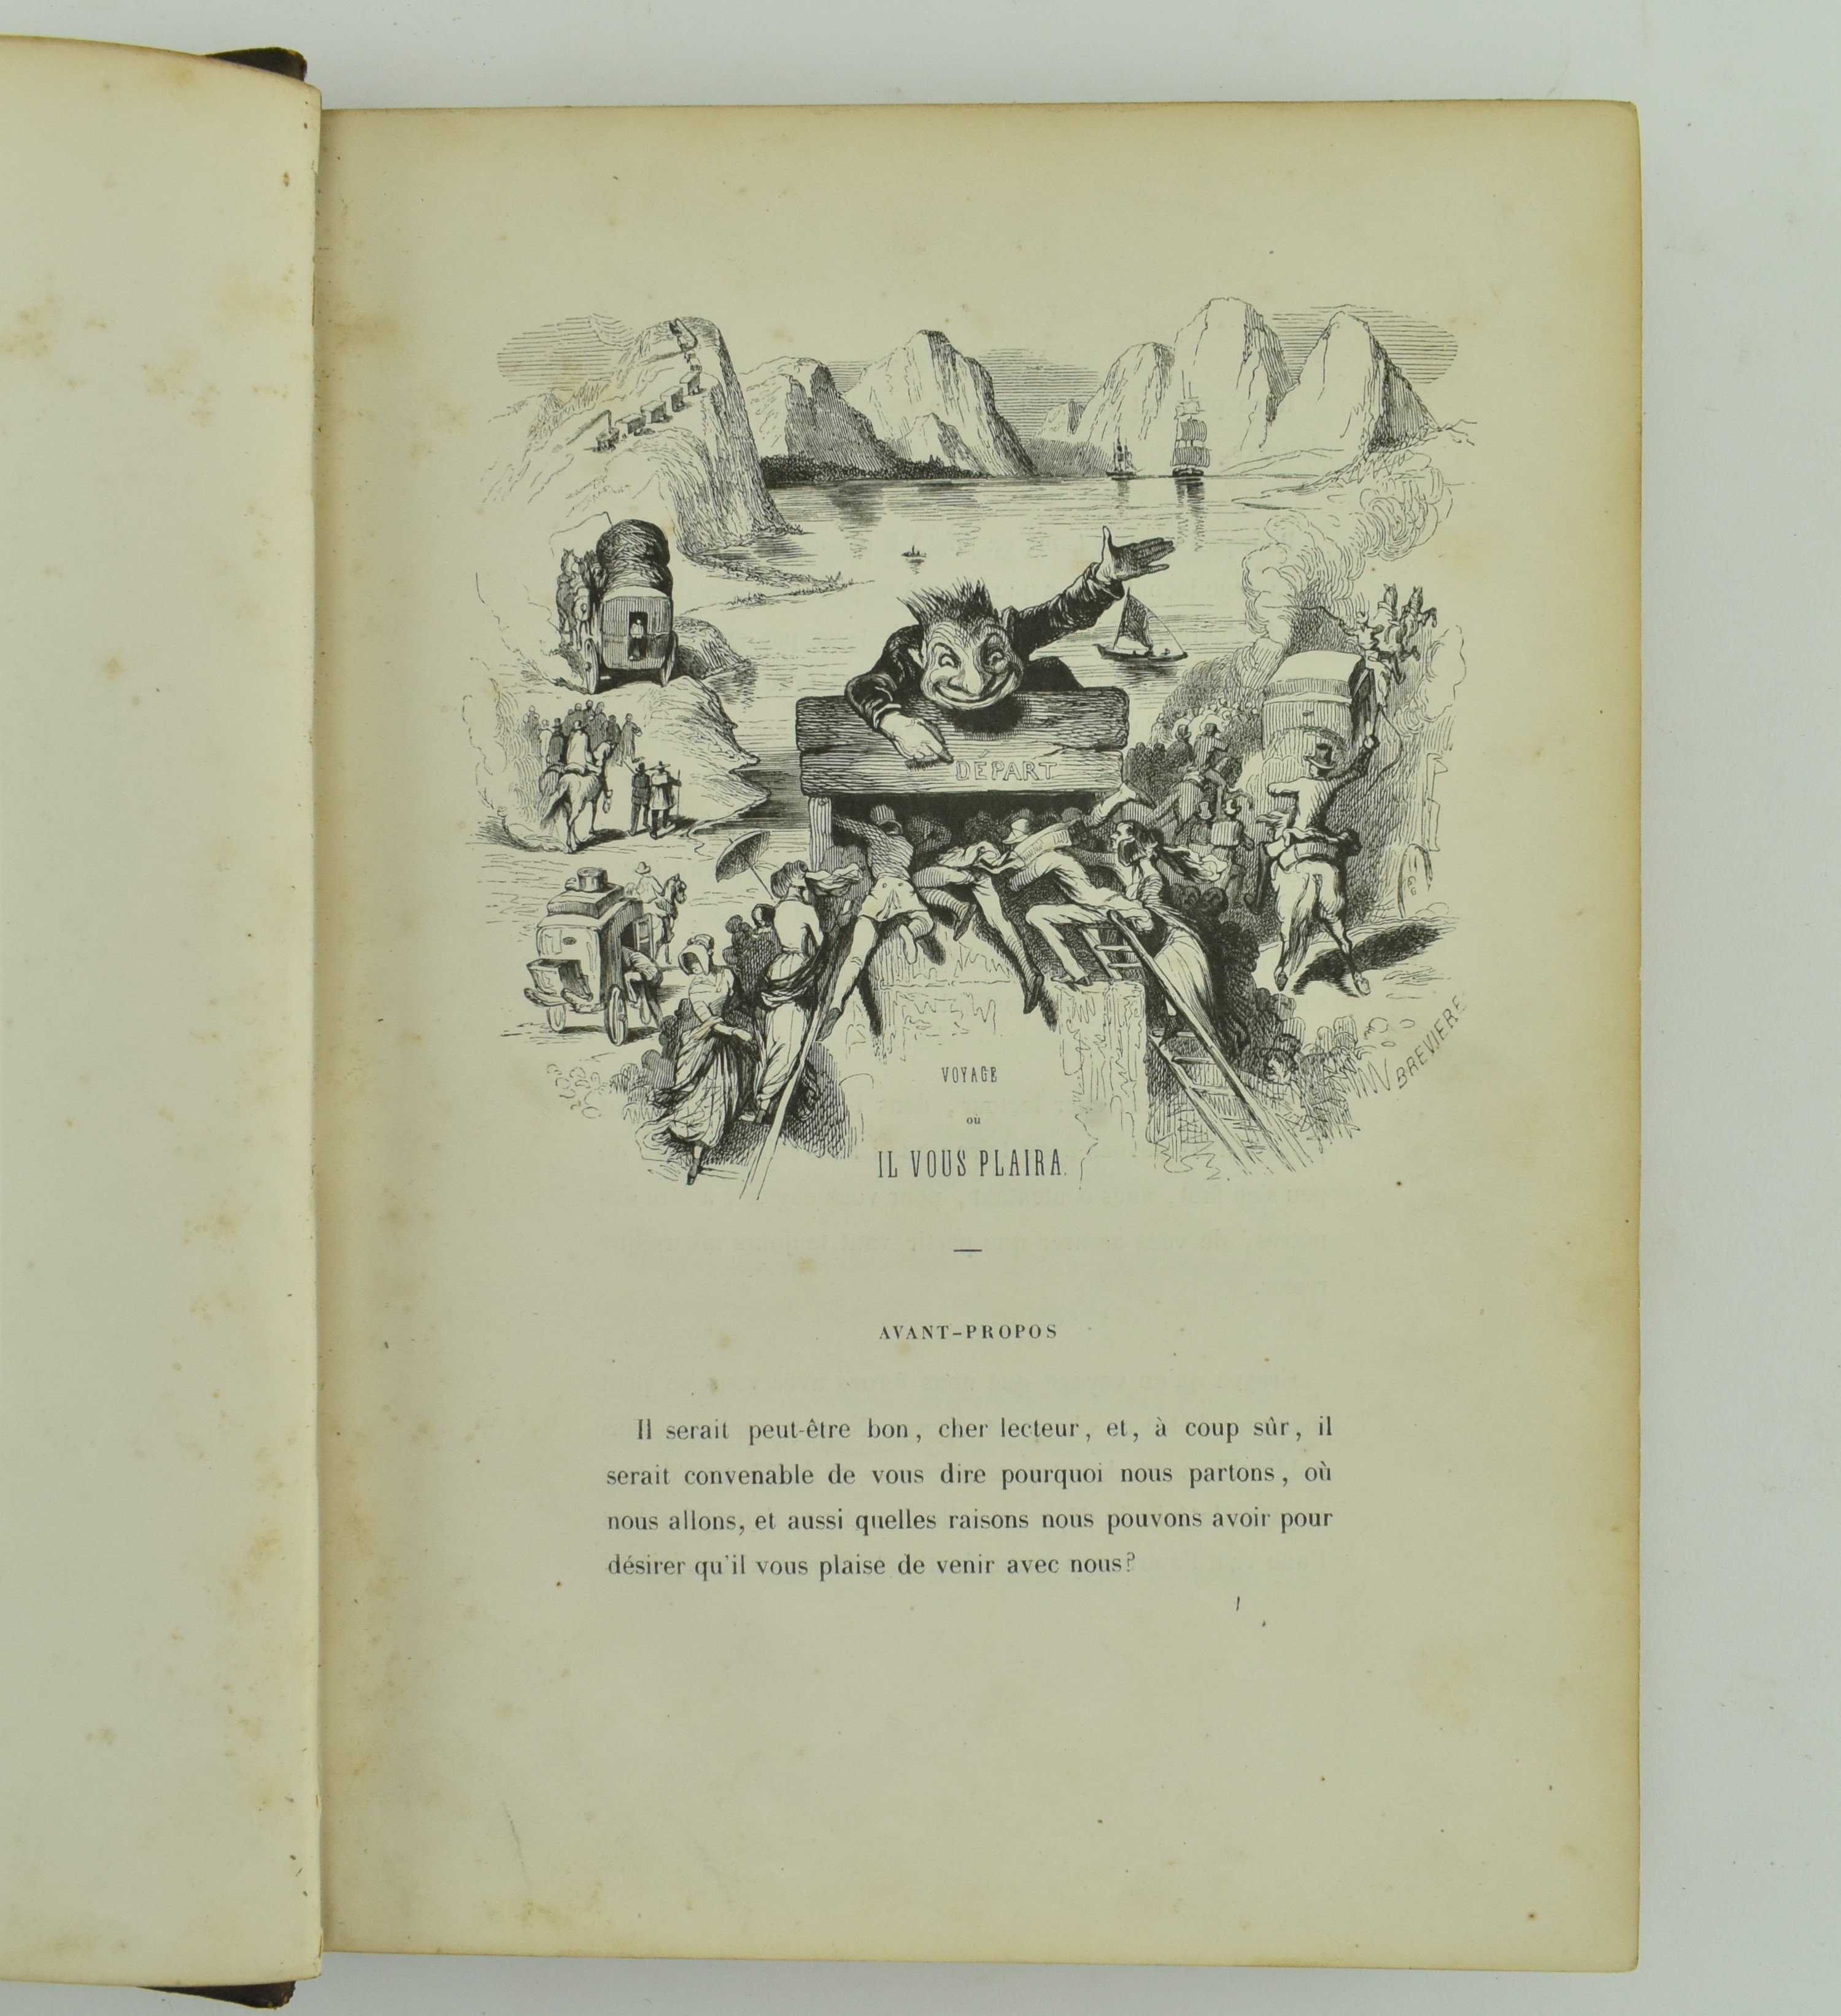 JOHANNOT, TONY. 1843 VOYAGE OU IL VOUS PLAIRA FIRST EDITION - Image 3 of 6